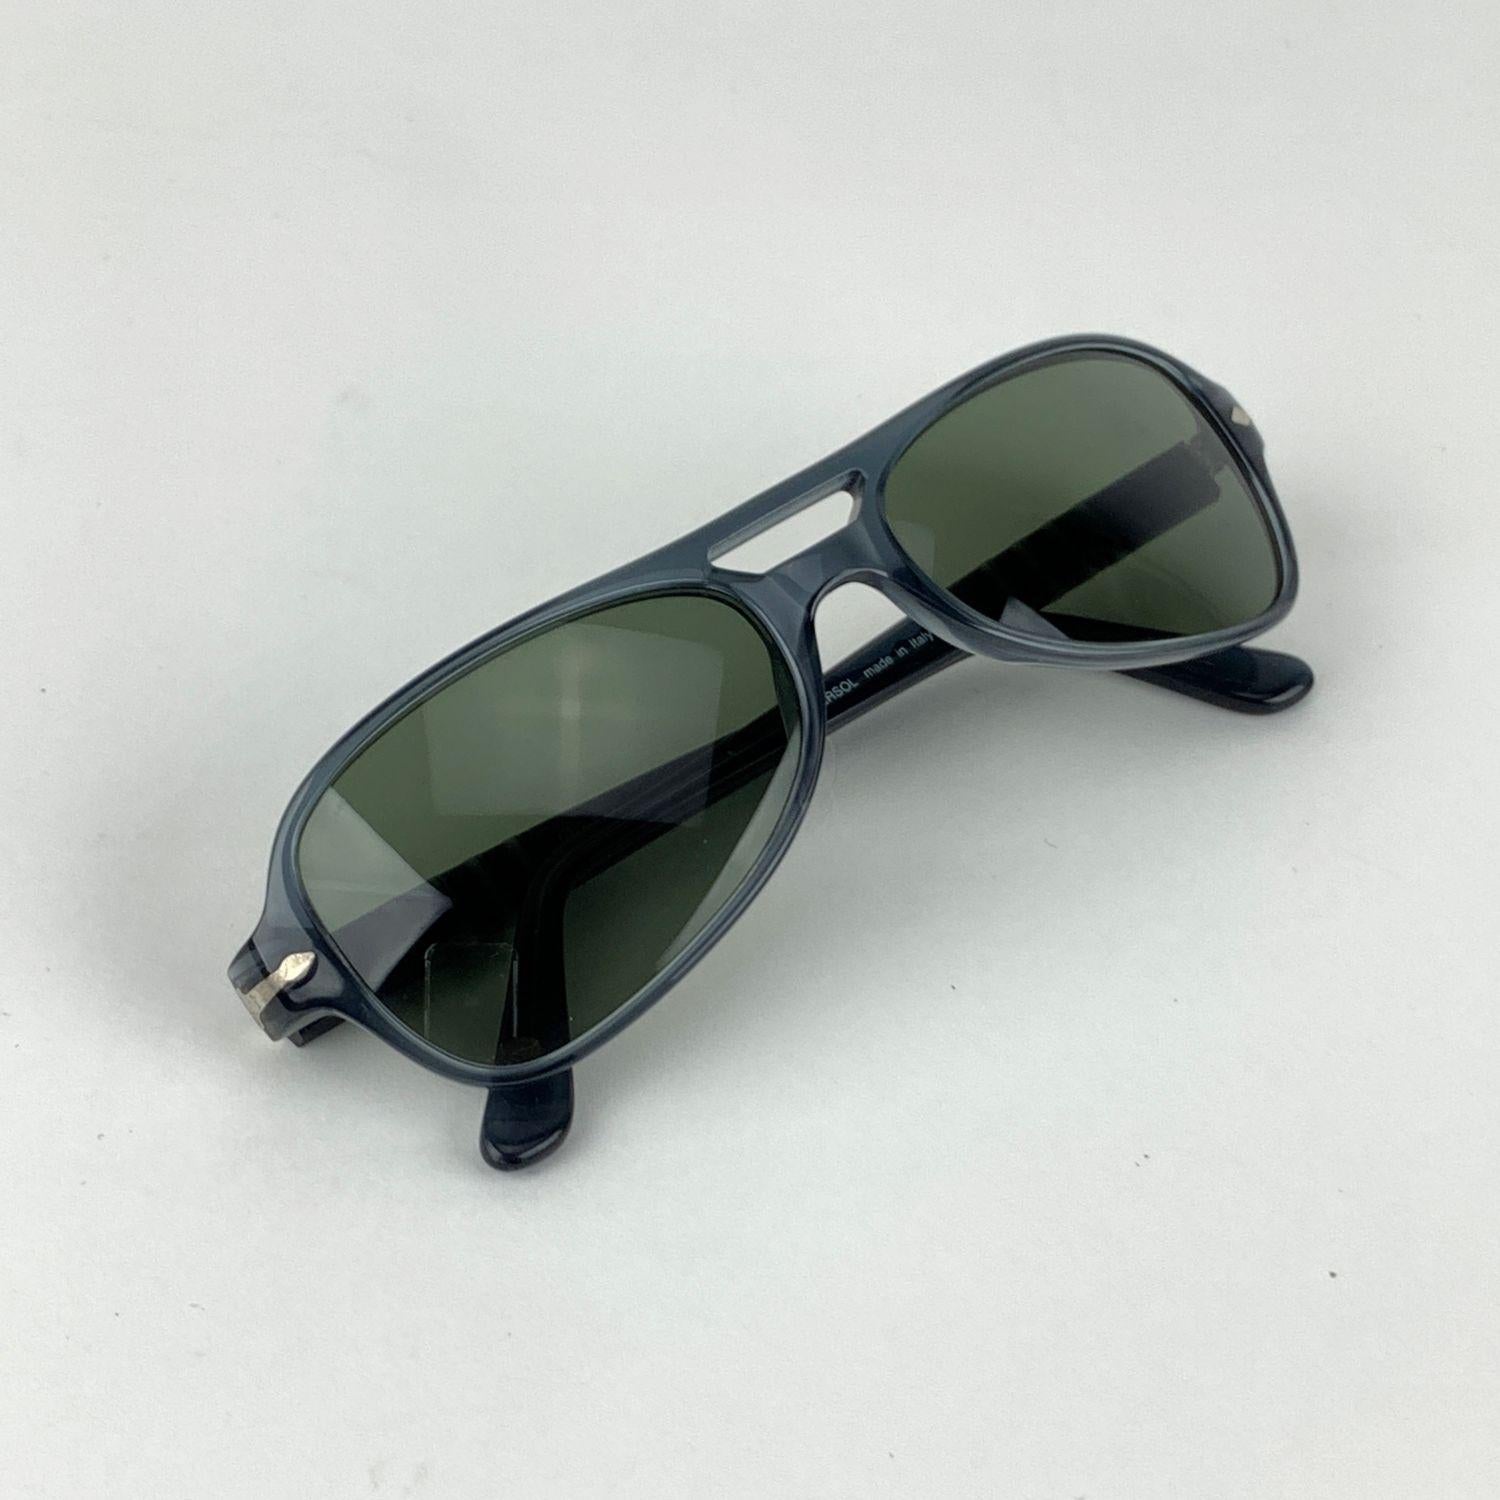 PERSOL Vintage Sunglasses- Model: 2628-S. Grey acetate aviator frame, with original Persol green lenses. Flexible temples. 100% UV protection. Made in Italy. Style & Refs:2628-S - 55/18- 225/31 - 135


Details

MATERIAL: Acetate

COLOR: Grey

MODEL: